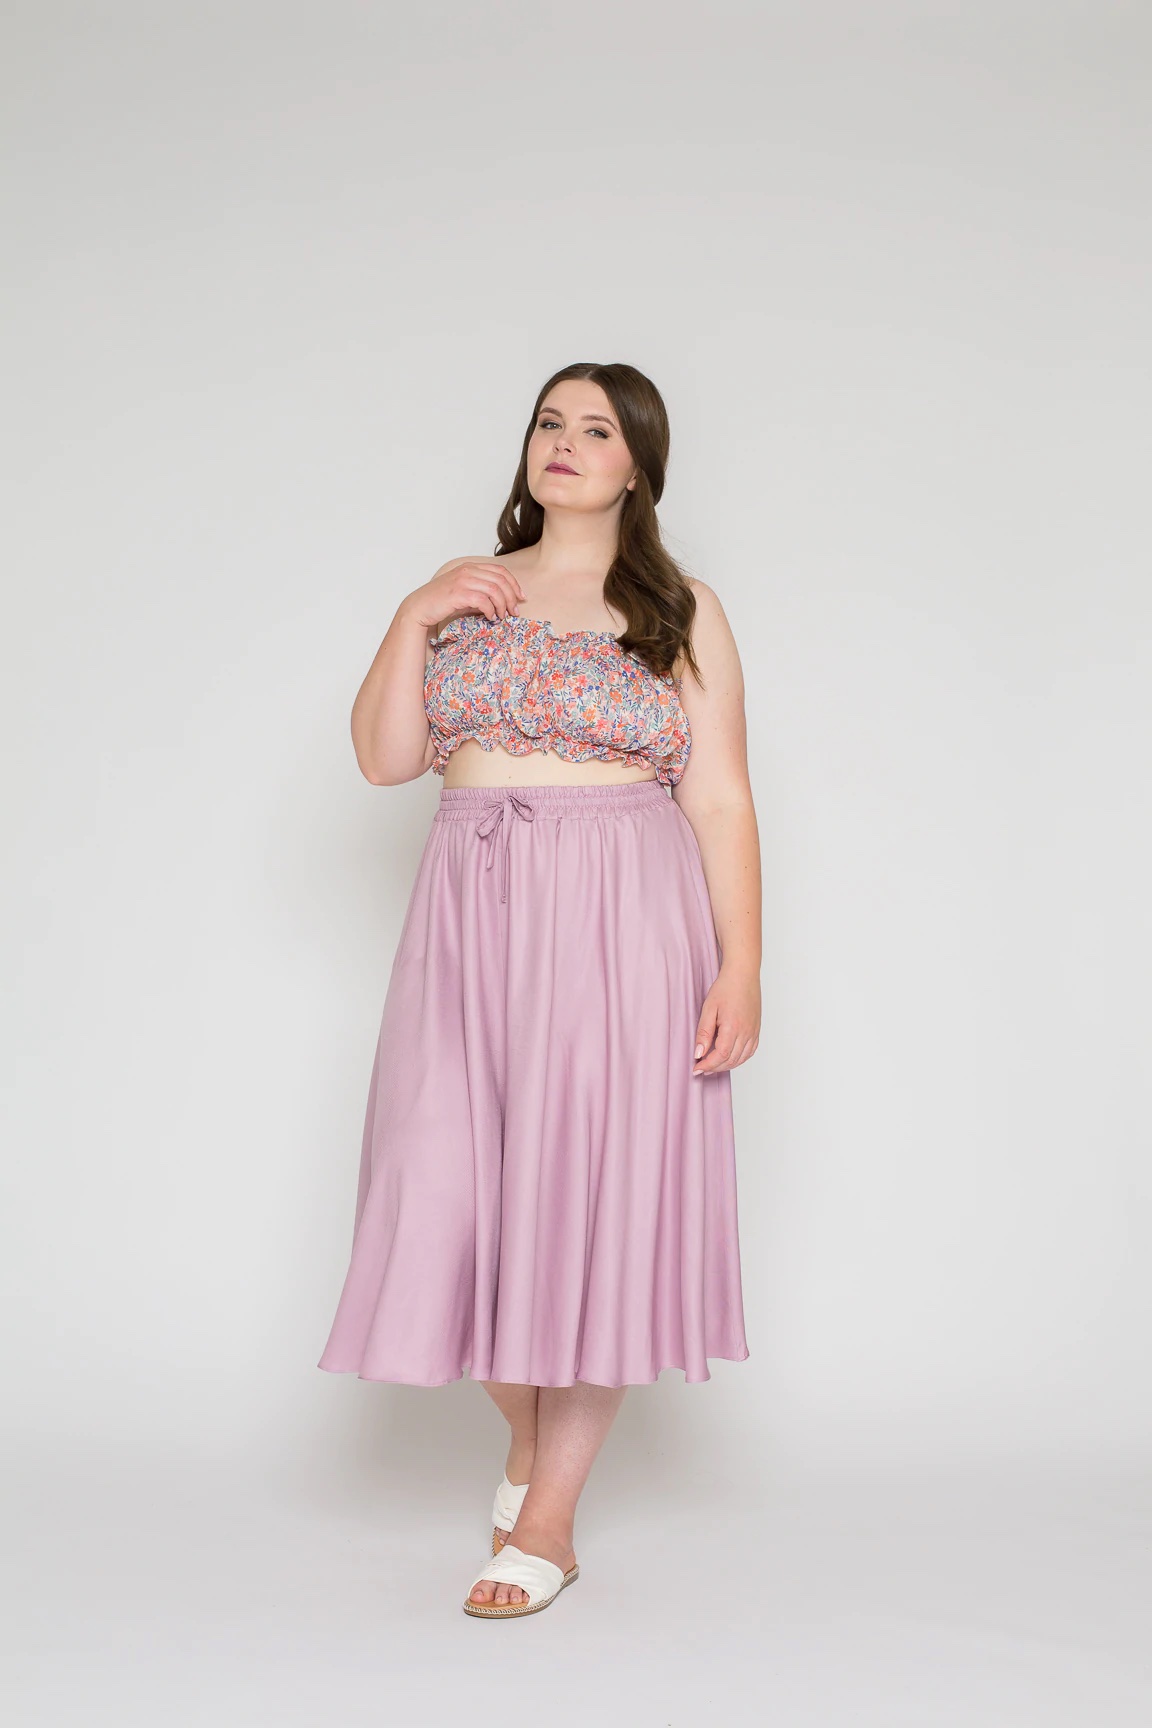 Woman wearing the Juni Skirt sewing pattern from Bara Studio on The Fold Line. A skirt pattern made in viscose, cotton, linen or tencel fabrics, featuring a gathered midi skirt with elastic waistband and tie.